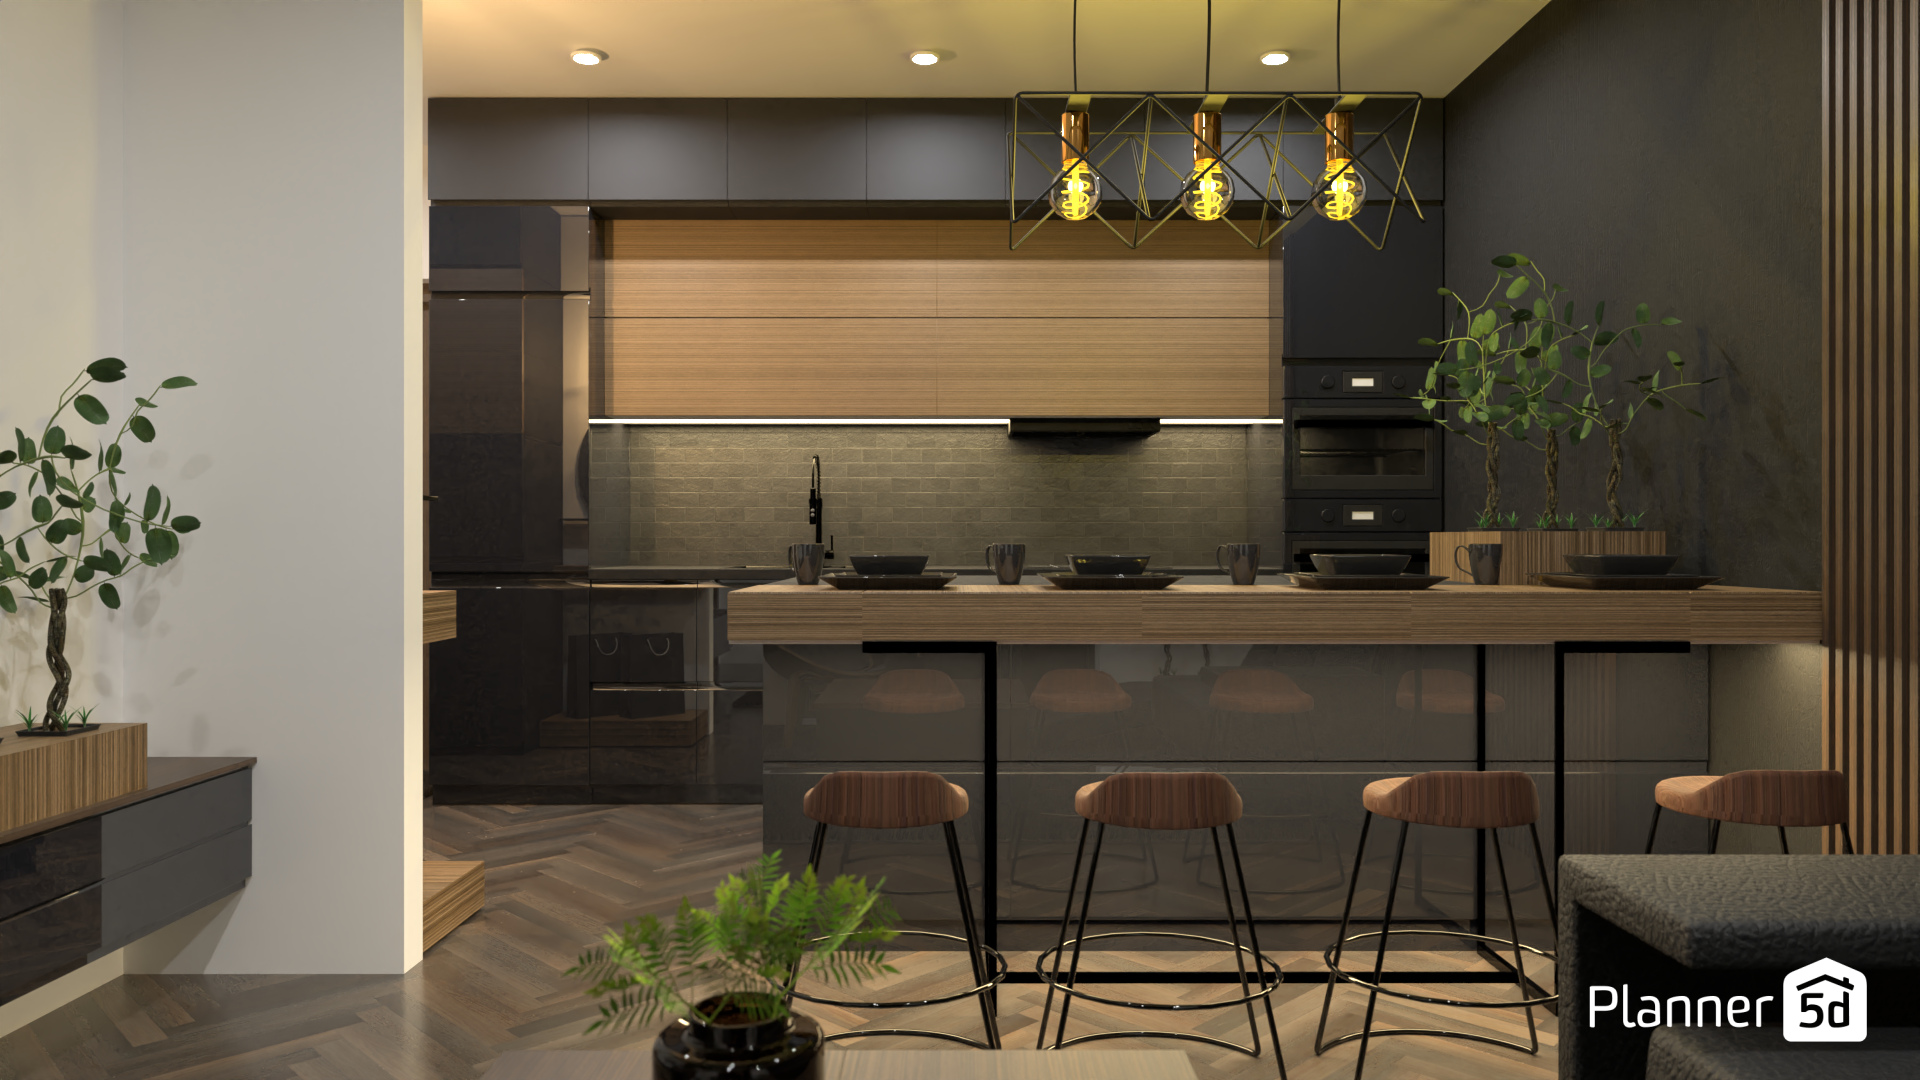 Cozy Modern Kitchen with Organic Elements 9447424 by Monika image